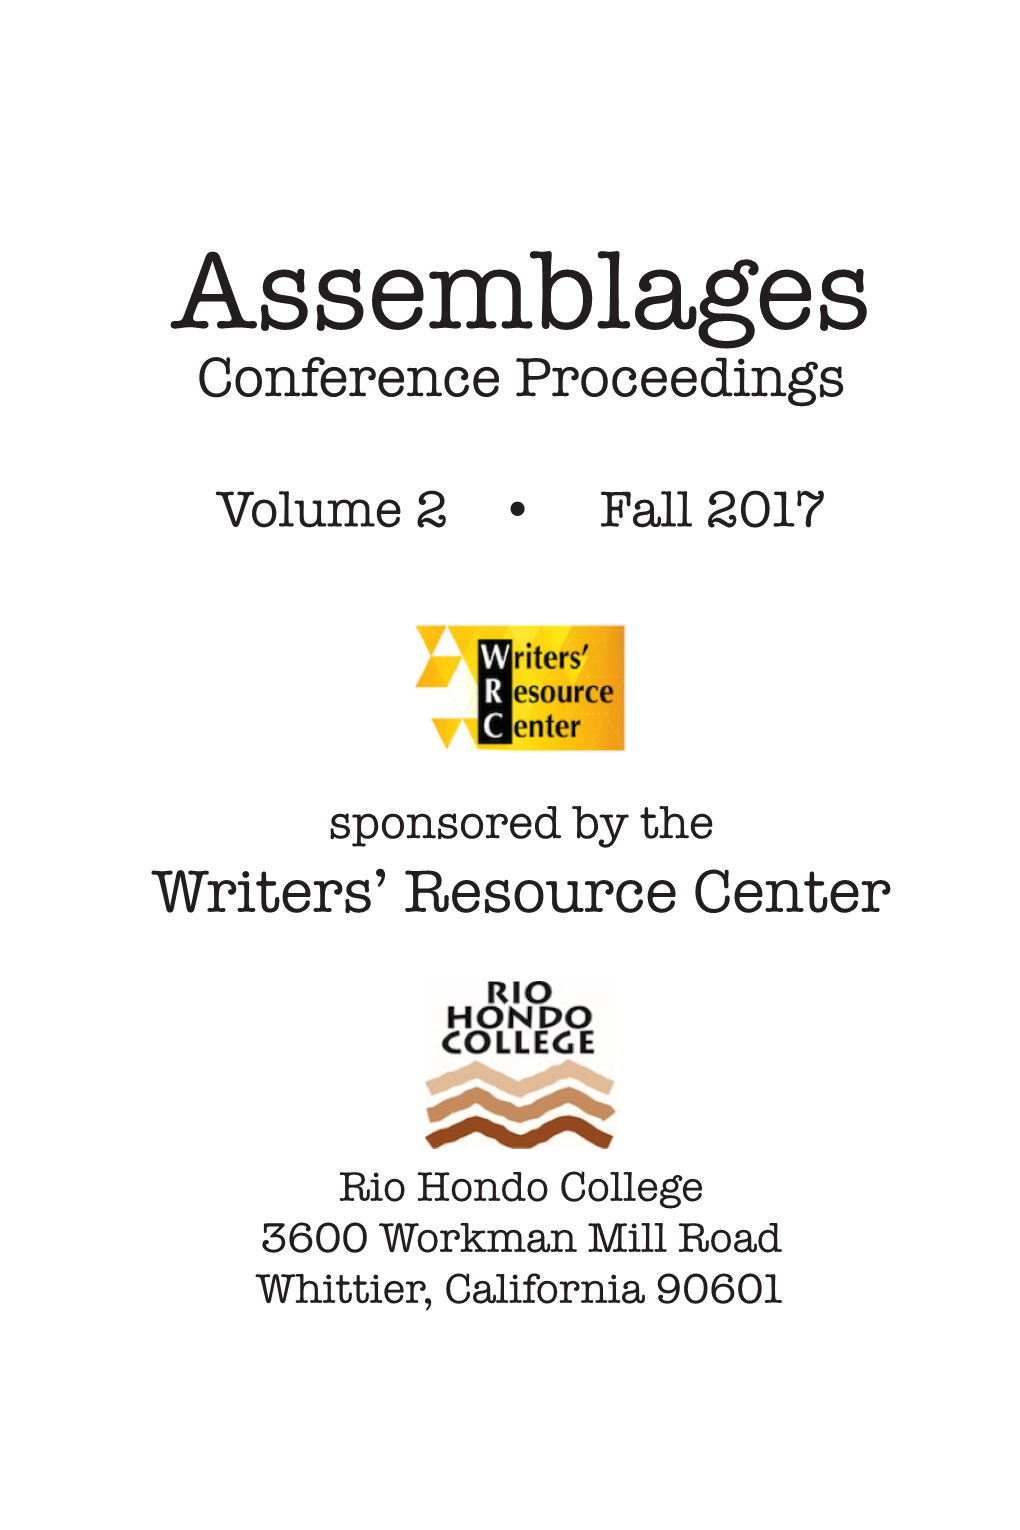 Assemblages Conference Proceedings